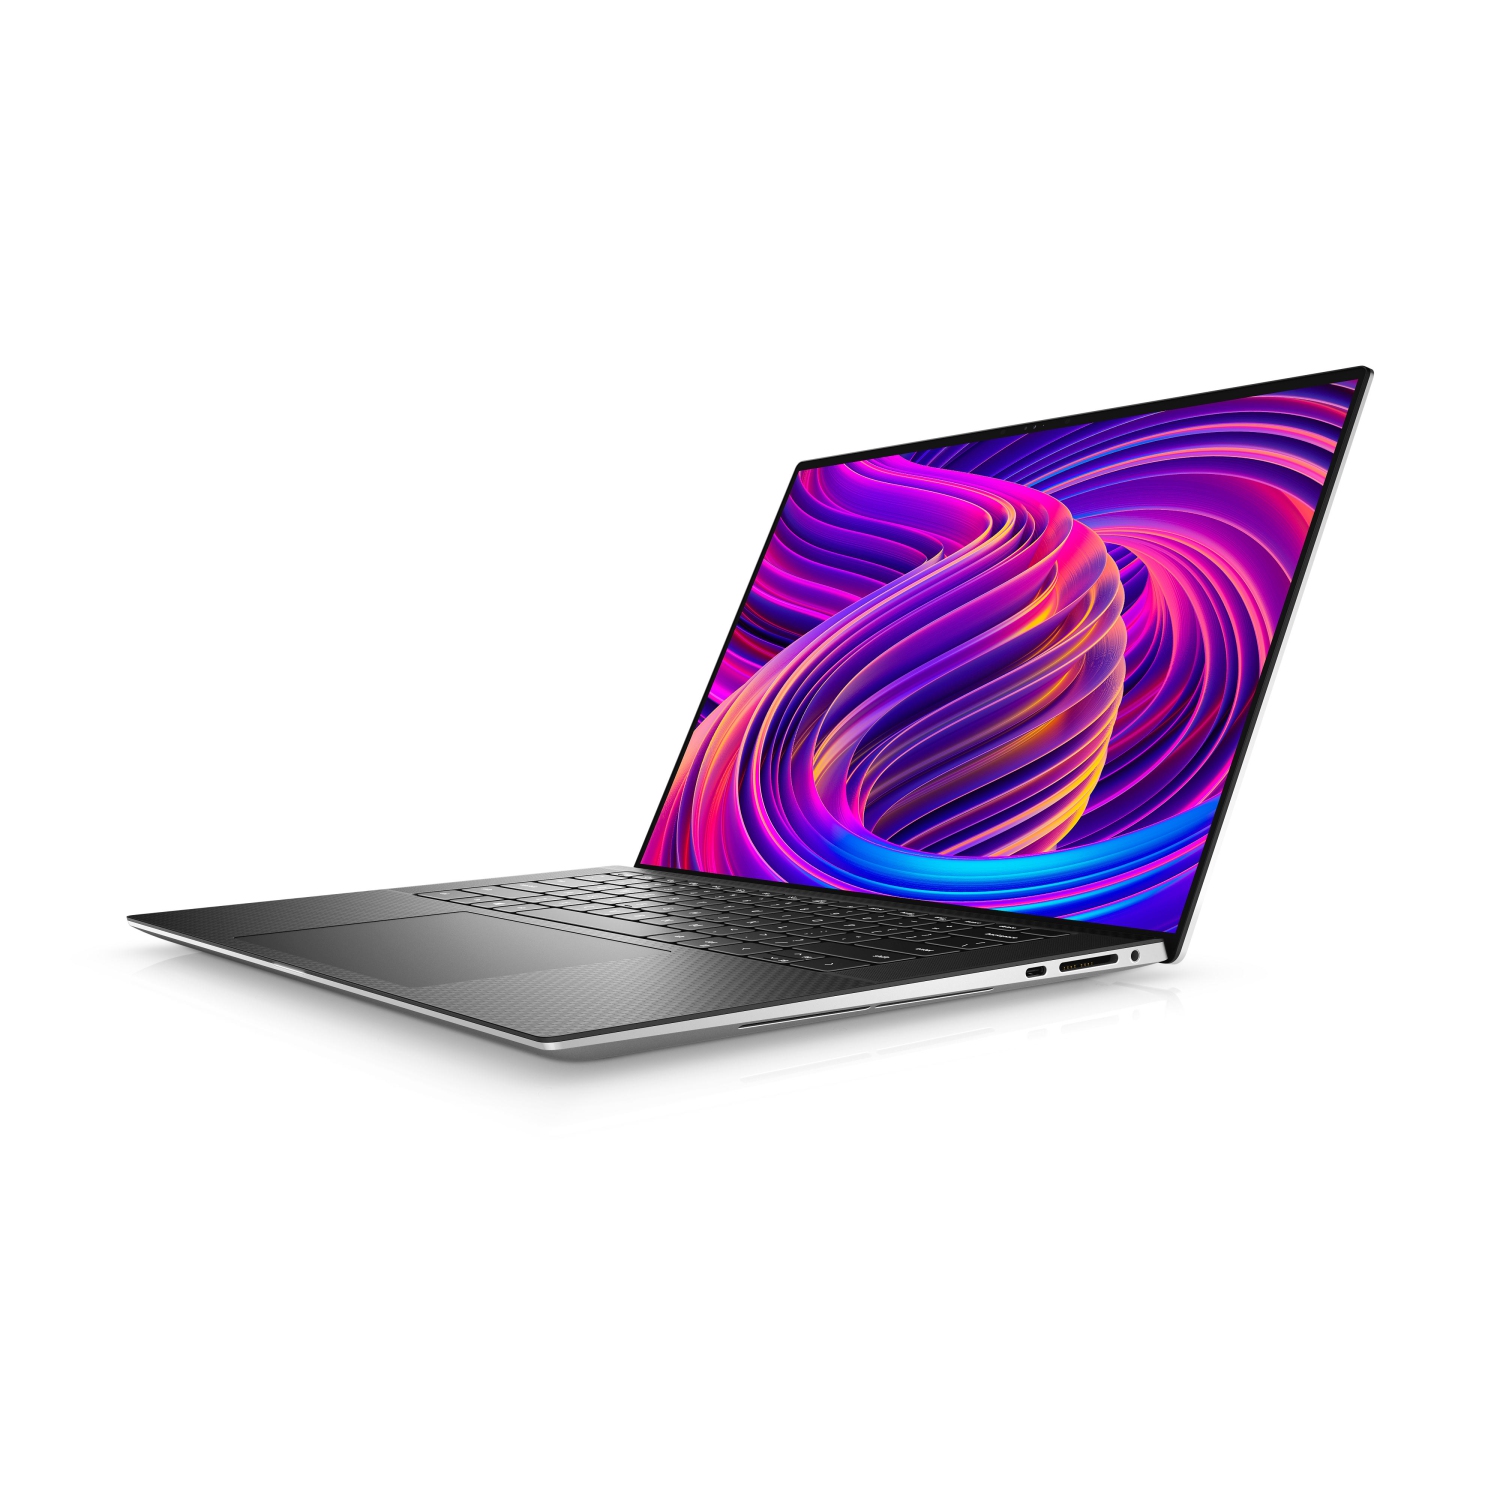 Refurbished (Excellent) - Dell XPS 15 9510 Laptop (2021), 15.6" 4K Touch, Core i7 - 2TB SSD - 32GB RAM - 3050 Ti, 8 Cores @ 4.6 GHz - 11th Gen CPU Certified Refurbished